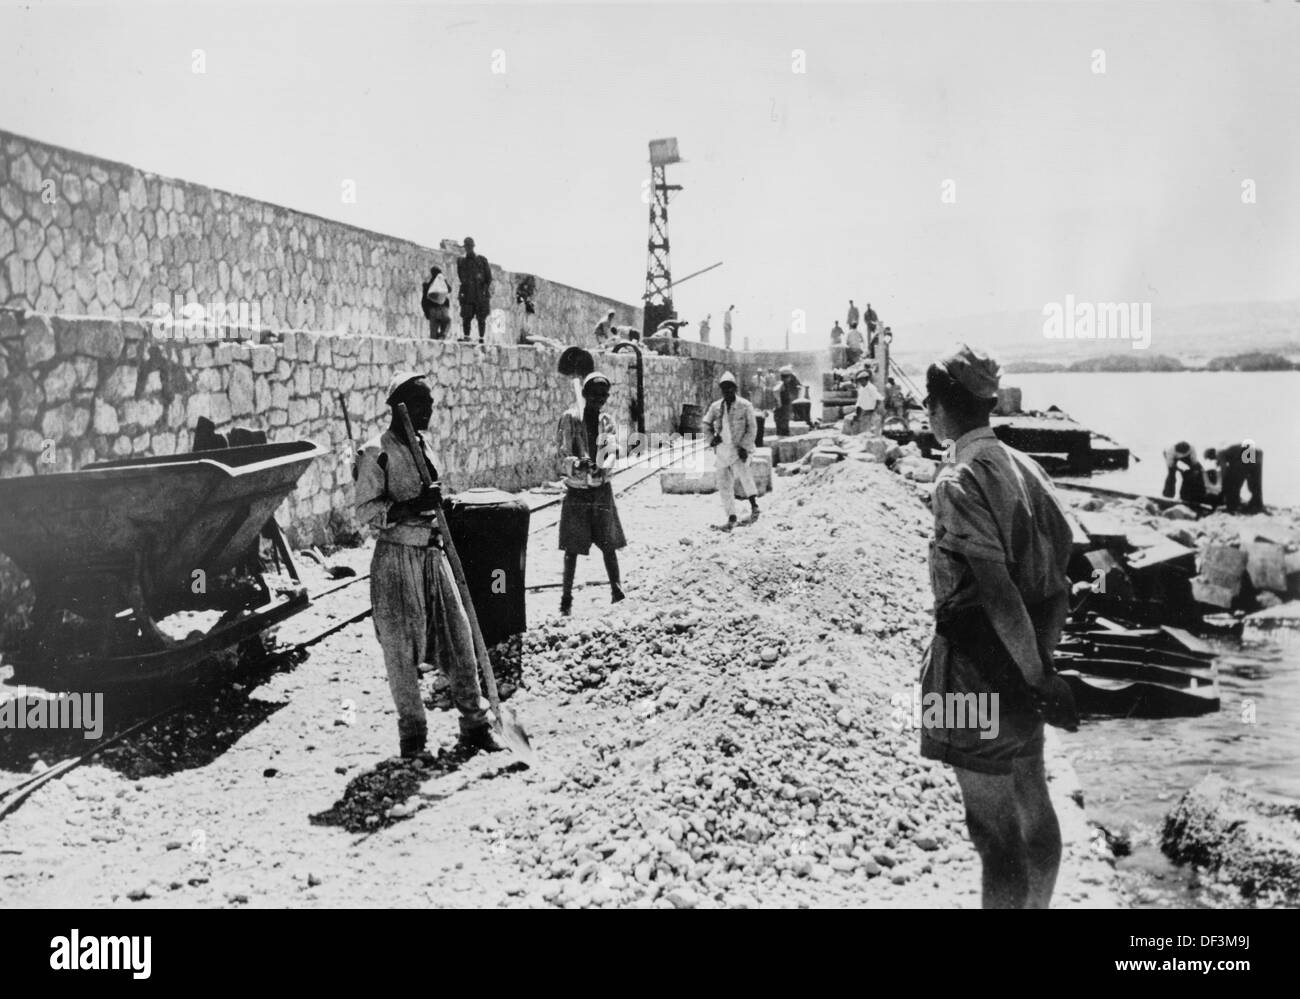 The image from the Nazi Propaganda! depicts locals working under the supervision of the Italian army to repair the port of Darna, Libya, published 19 May 1942. Fotoarchiv für Zeitgeschichte Stock Photo